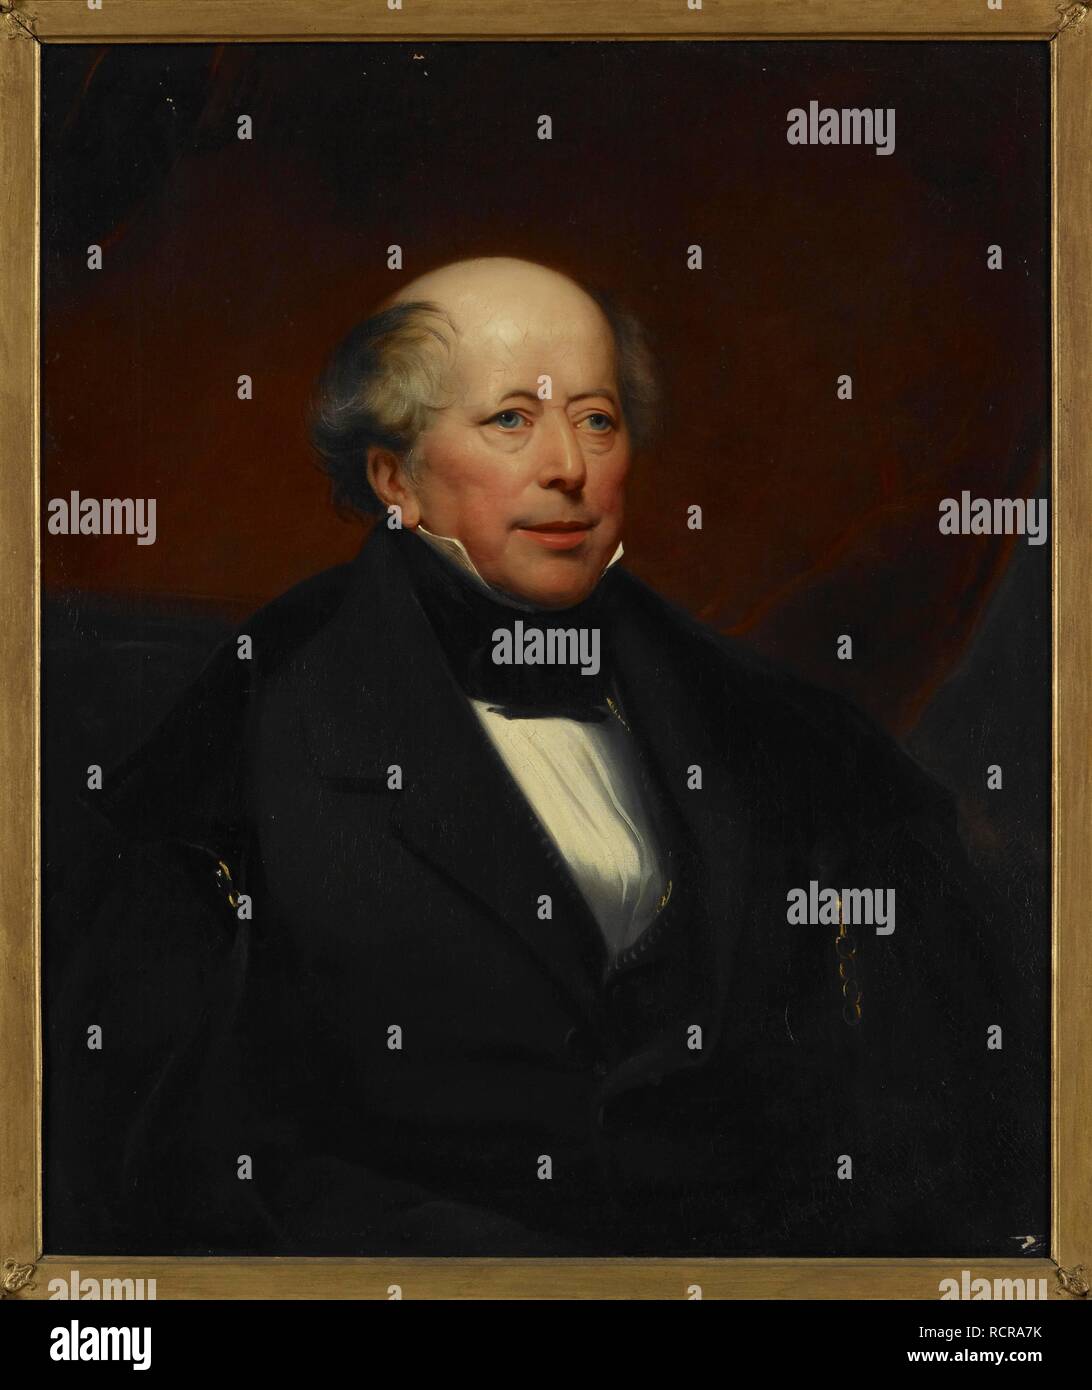 William Abington (c.1770-1839). Clerk to the East India Company's Military Seminary 1809-34. Three-quarters length portrait of an elderly man seated in a chair against a background of dark red draperies. He wears a high-collared shirt, black cravat, brown coat and black cloak. 1837. Oil painting. 30 by 25 ins (76 by 63.5 cms). Source: Foster 845. Author: BARRAUD, HENRY. Stock Photo